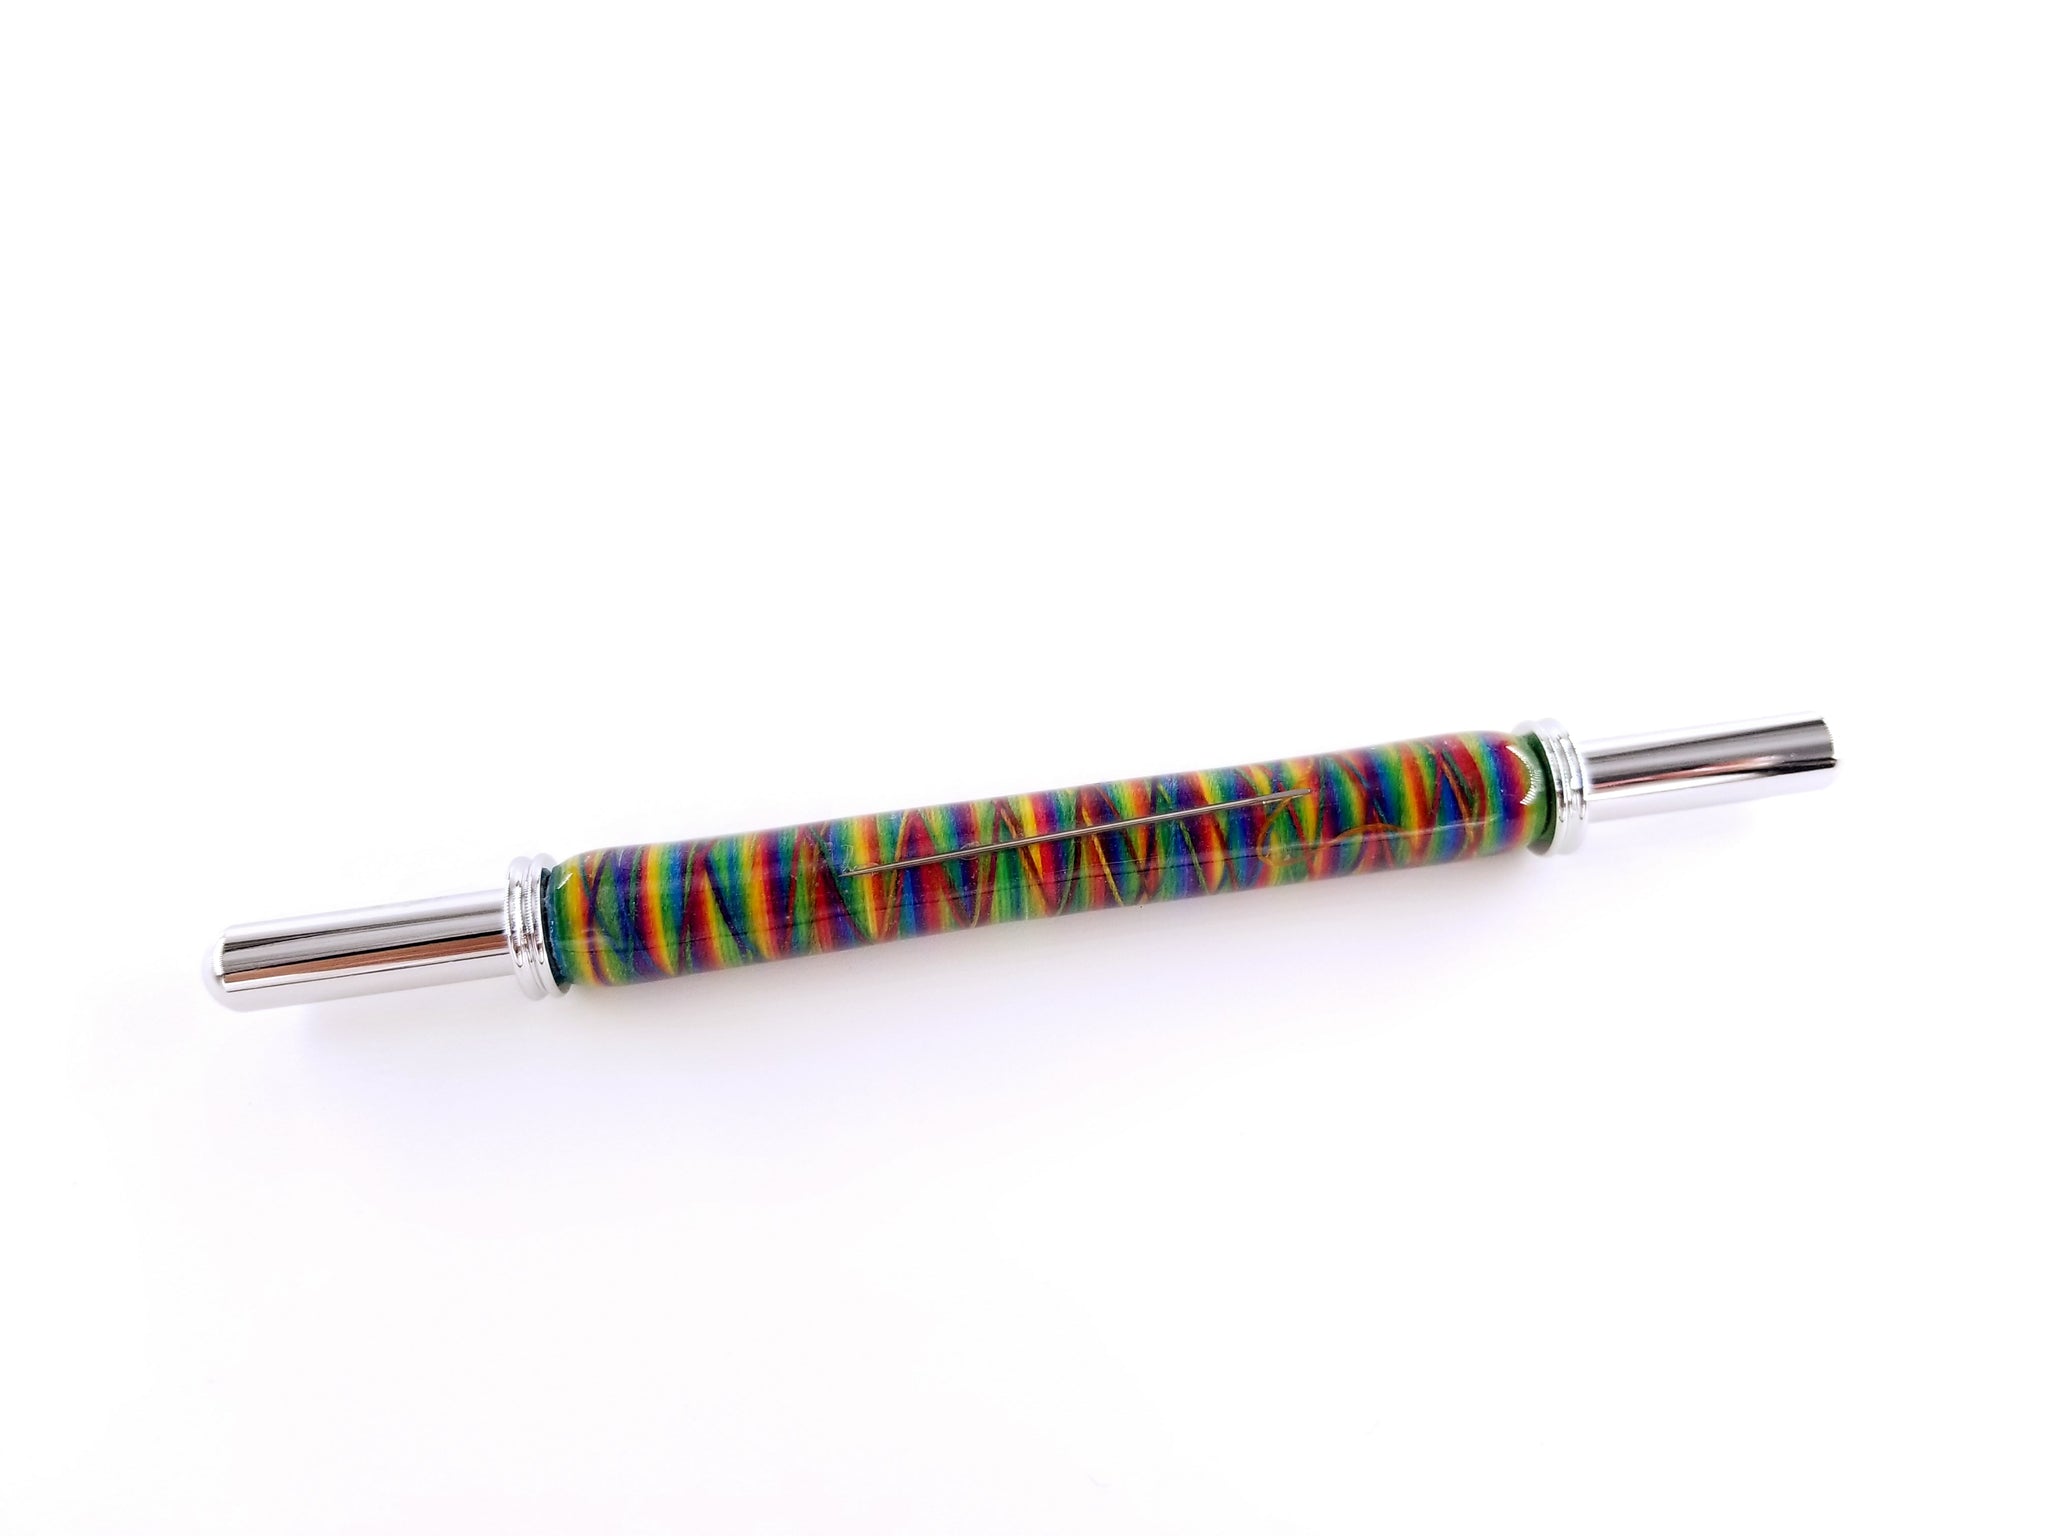  Personalized Seam Ripper for Sewing Crafting Thread